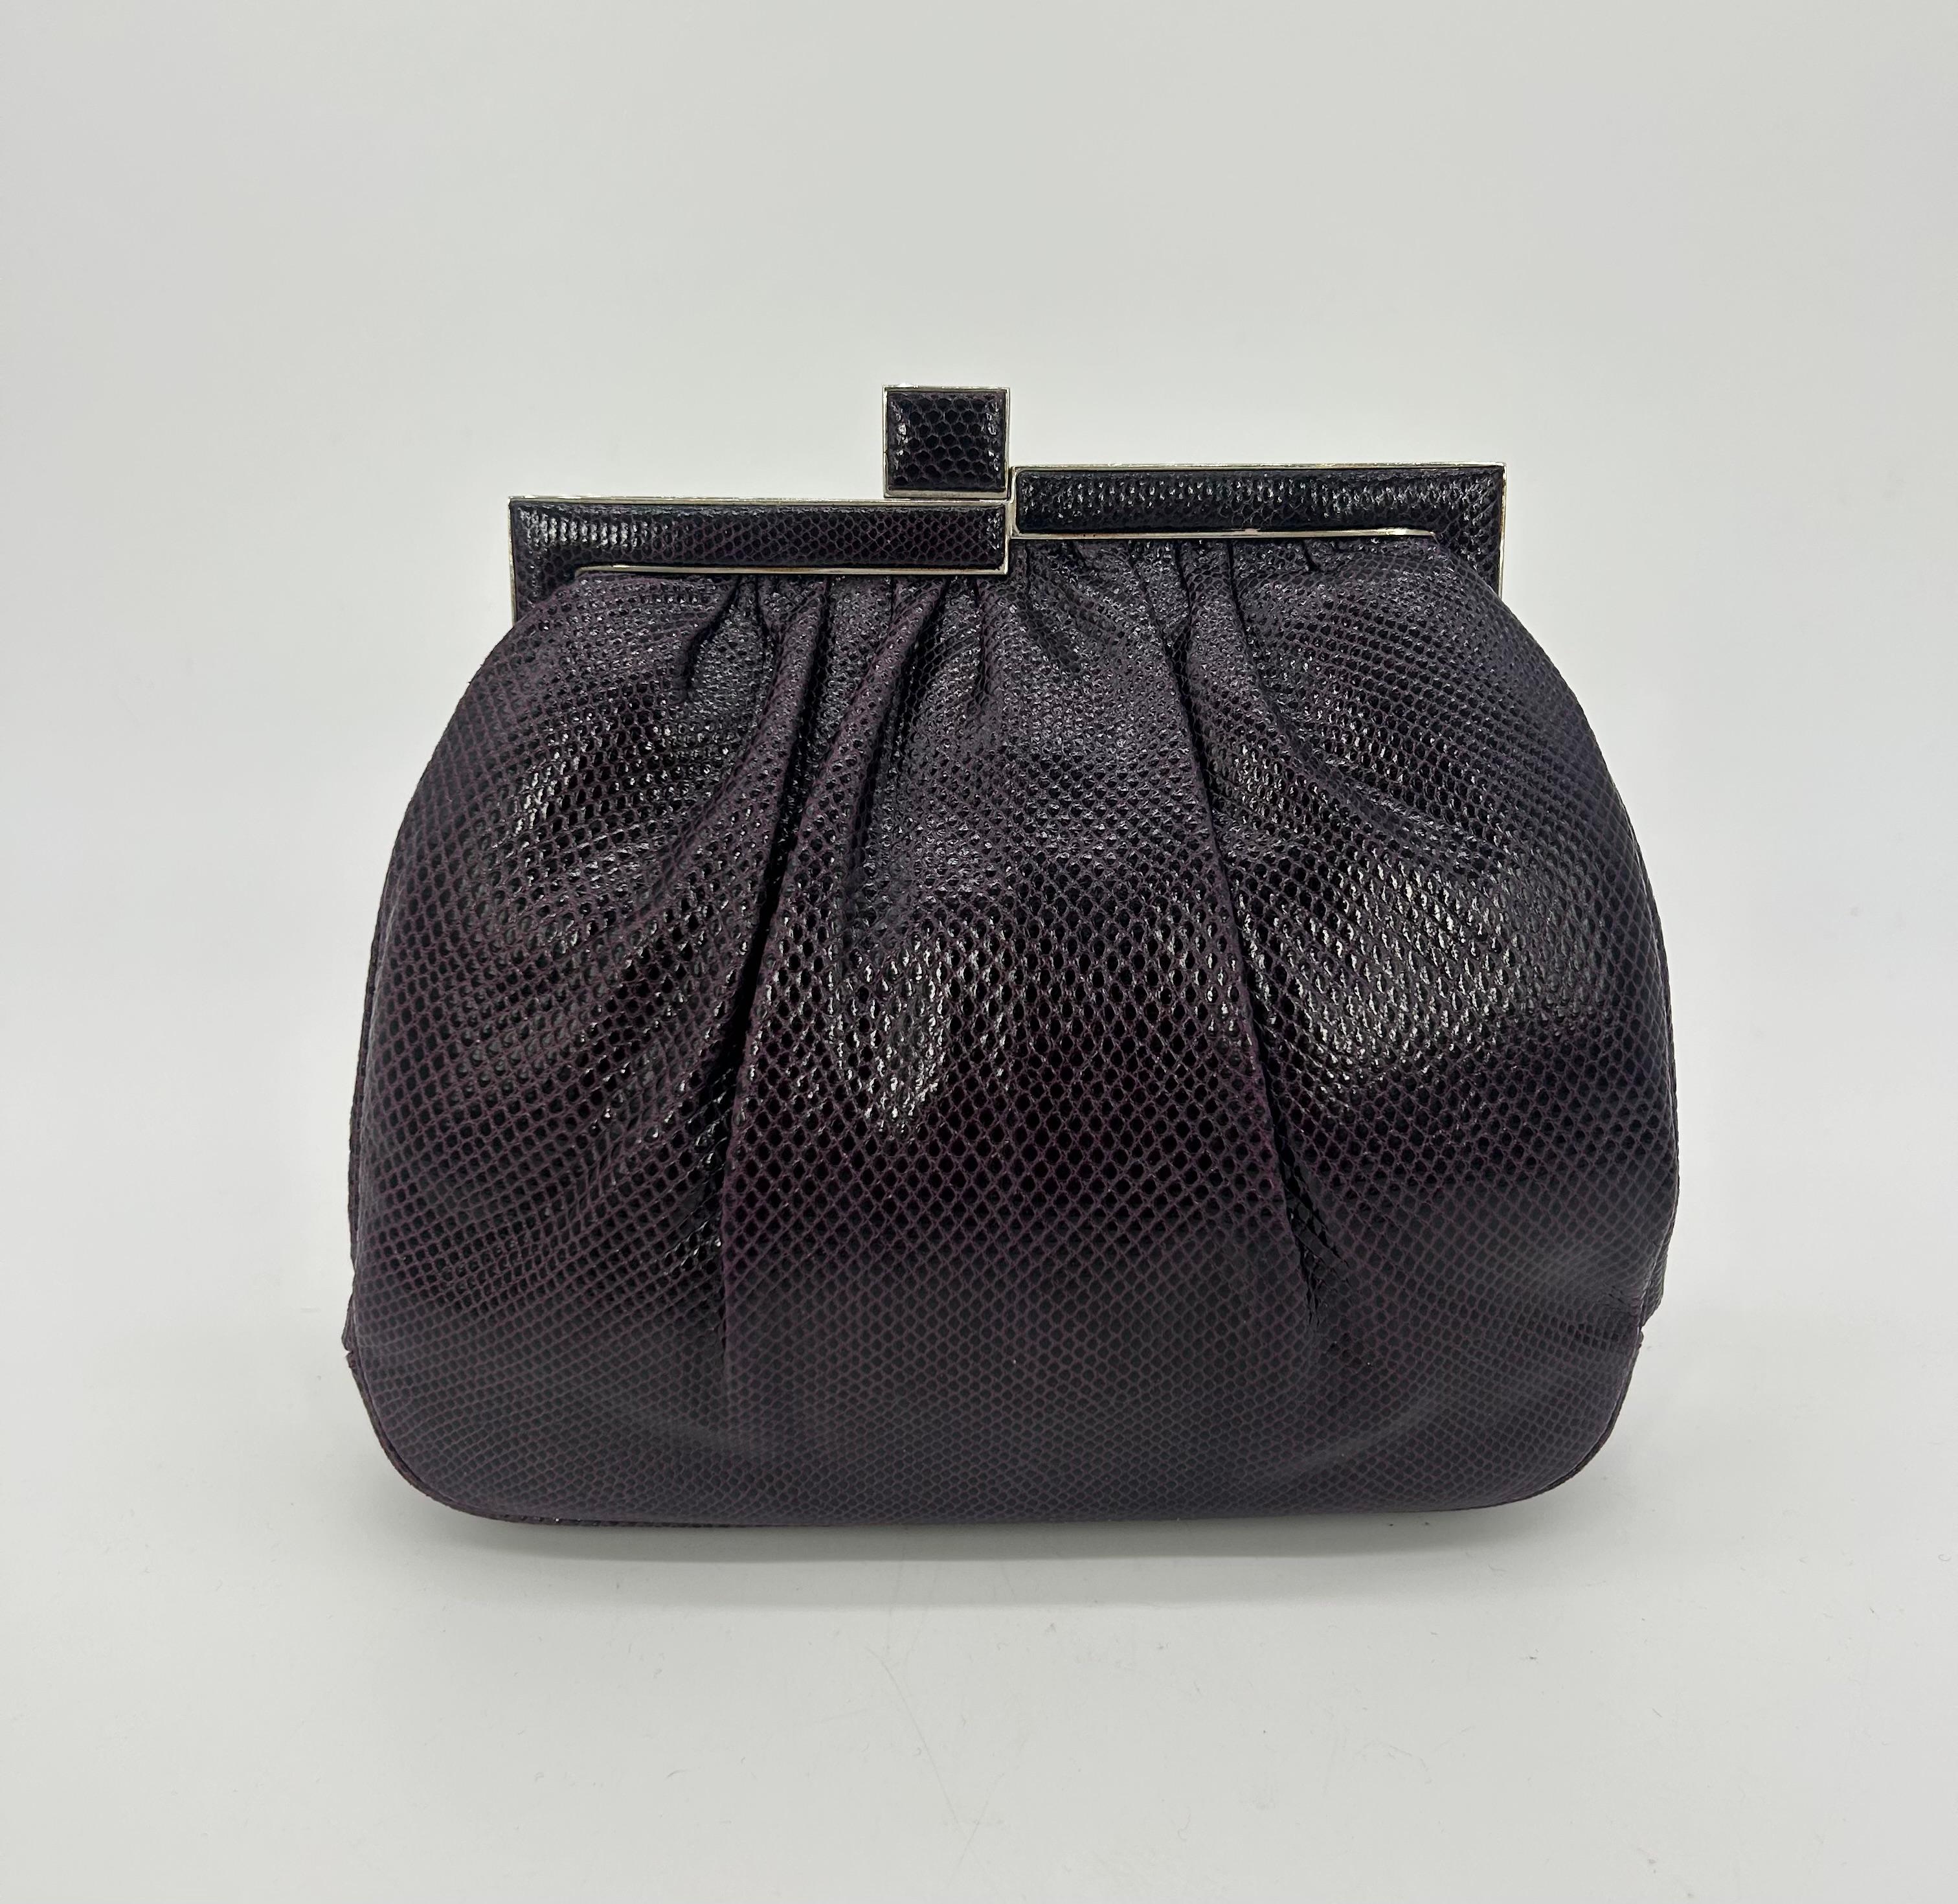 Judith Leiber dark purple lizard clutch in very good condition. Dark purple lizard leather exterior with pleats on both front and back sides. Silver hardware top edge with unique minimalist deco style design featuring small multicolored gemstones.